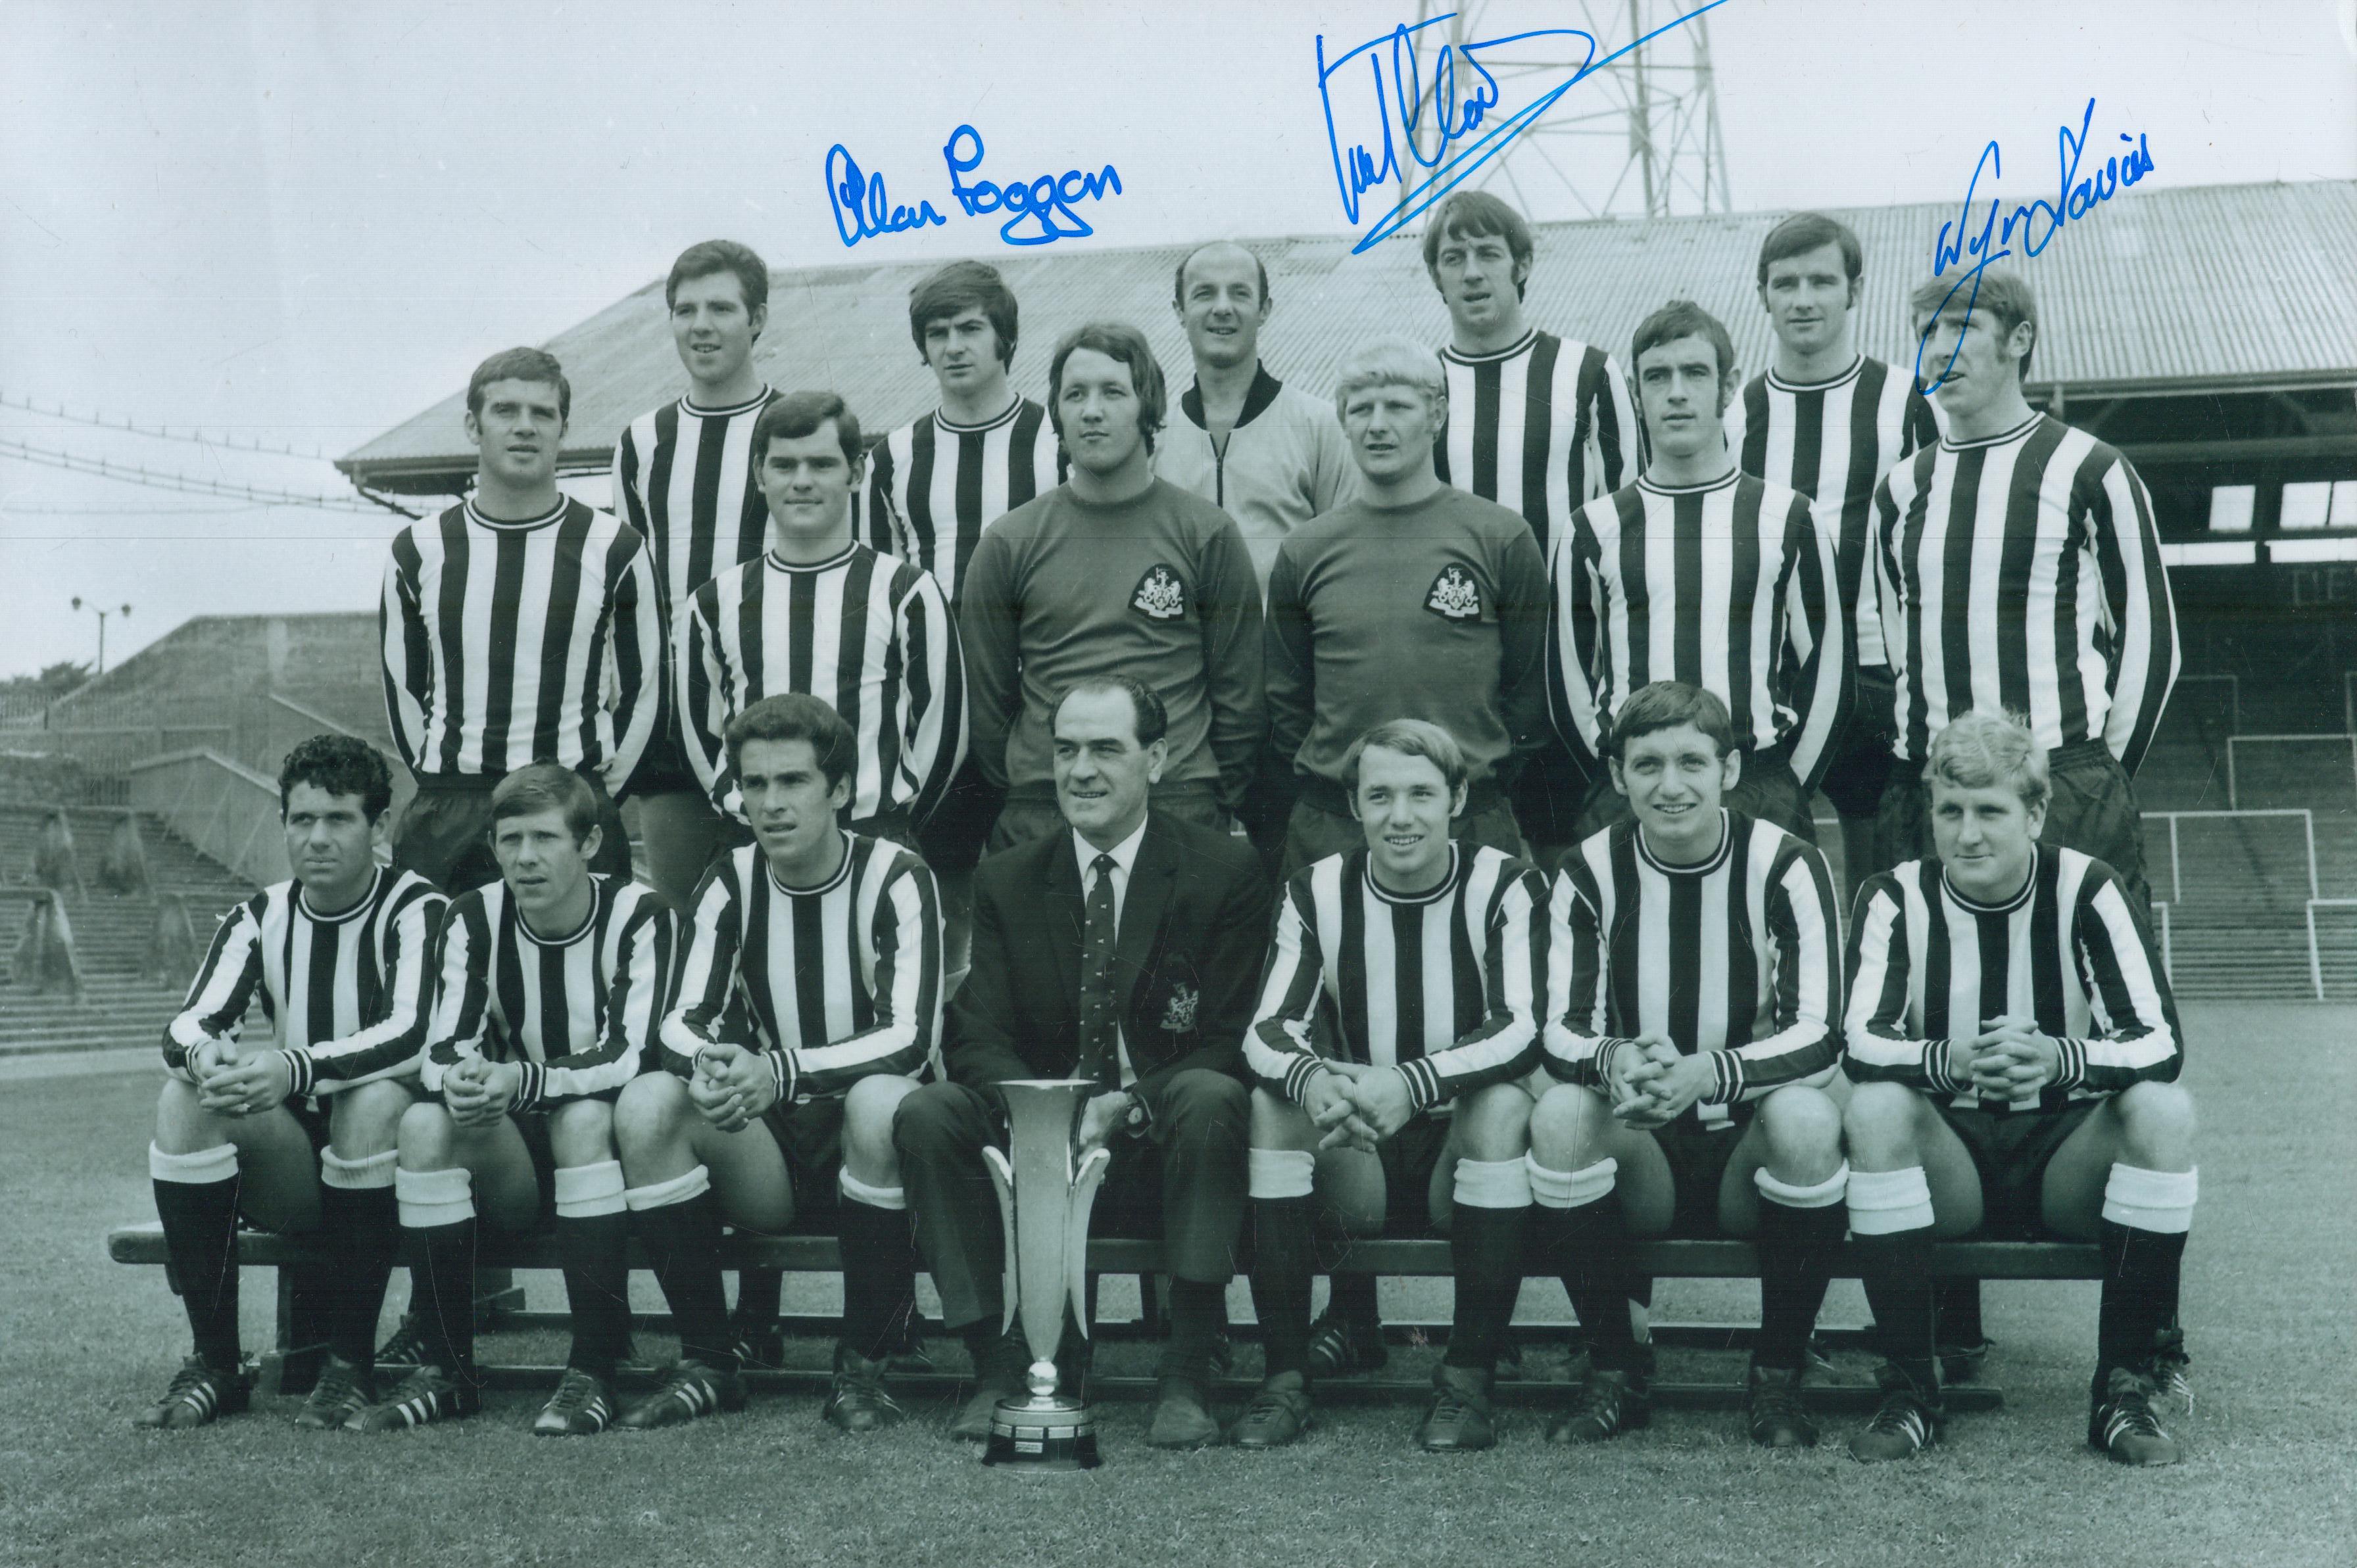 Newcastle United Legends multi signed 12x8 inch black and white photo includes Frank Clarke, Alan